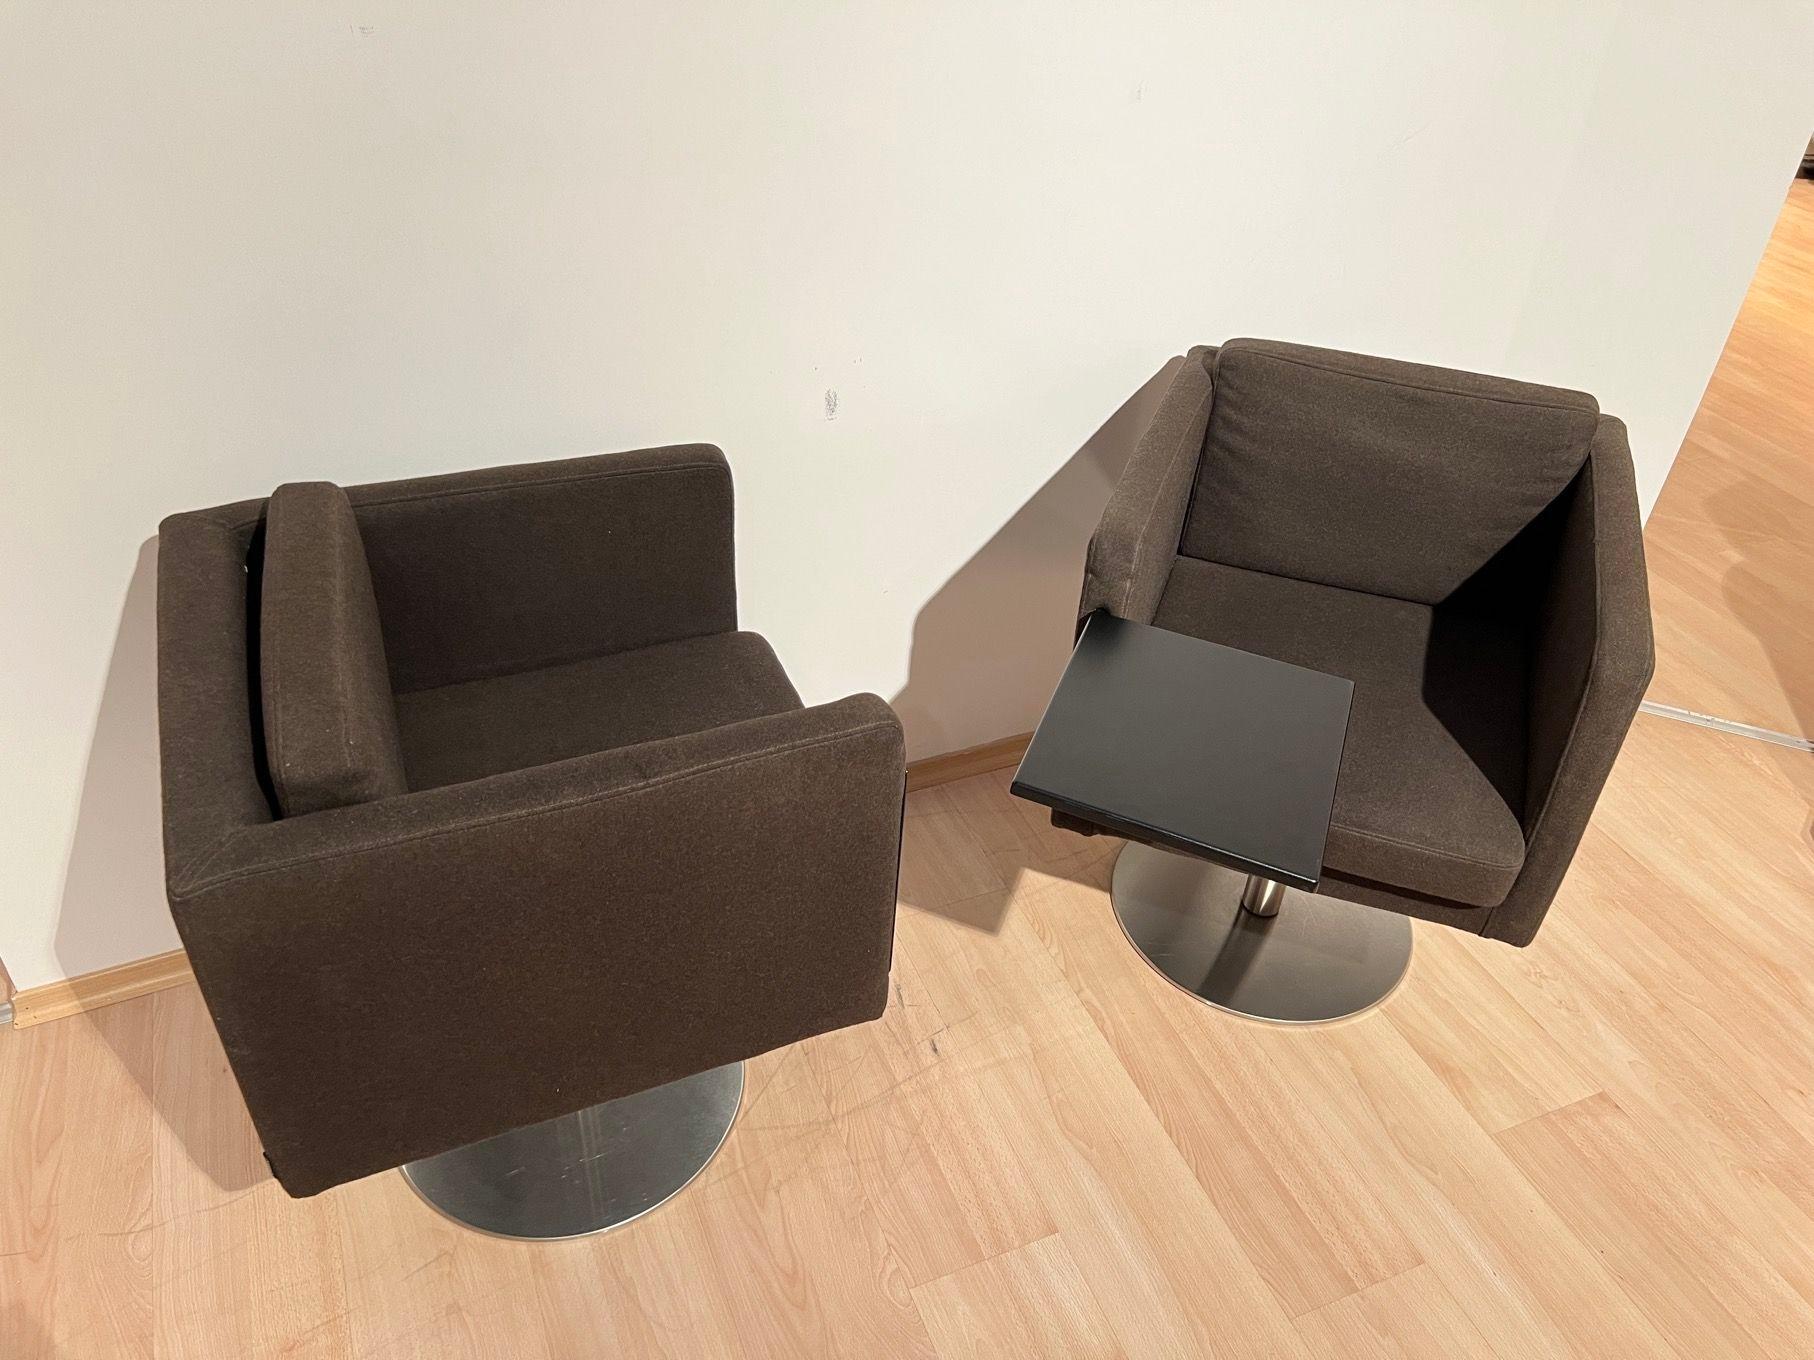 Pair of cubic Swivel Chairs with Tableau by Lensvelt, Netherlands, early 21st C. For Sale 4